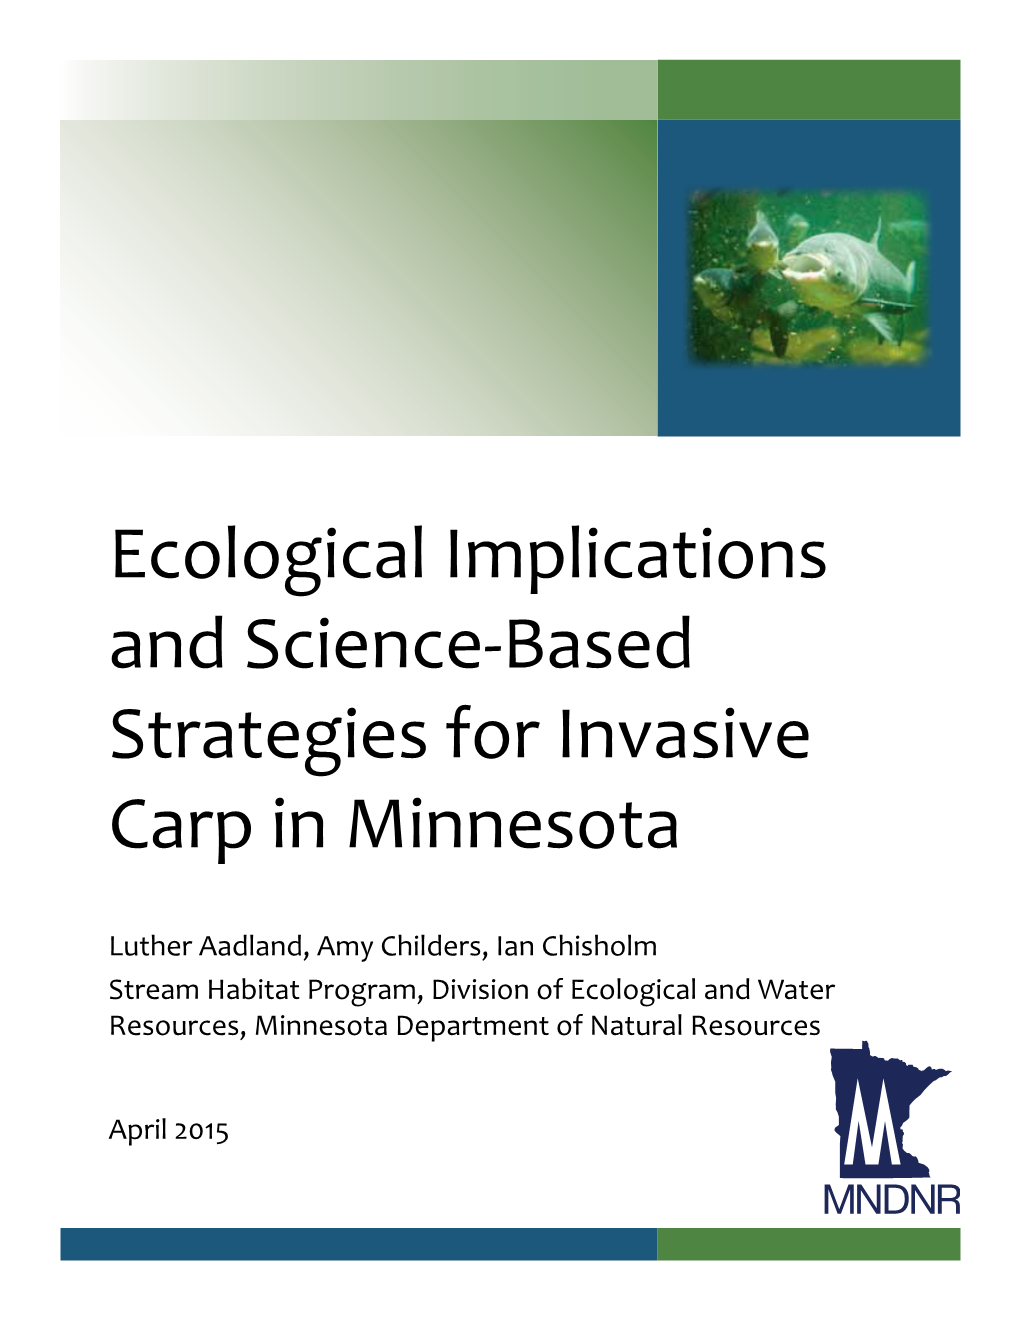 Ecological Implications and Science-Based Strategies for Invasive Carp in Minnesota